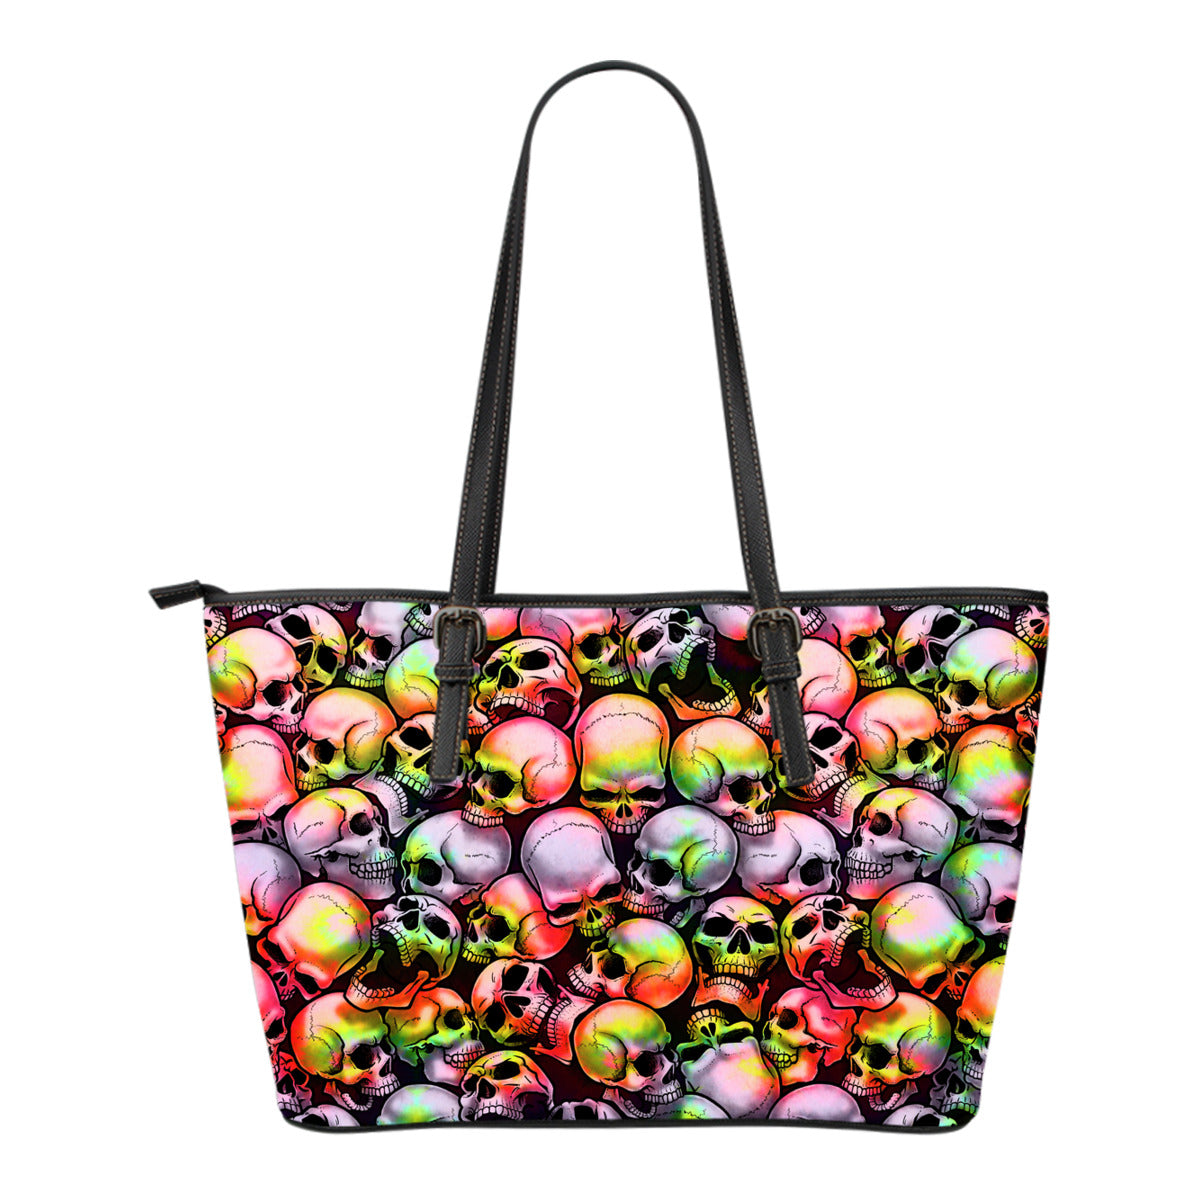 Skull Pile Small Leather Tote Bag - Tie Dye